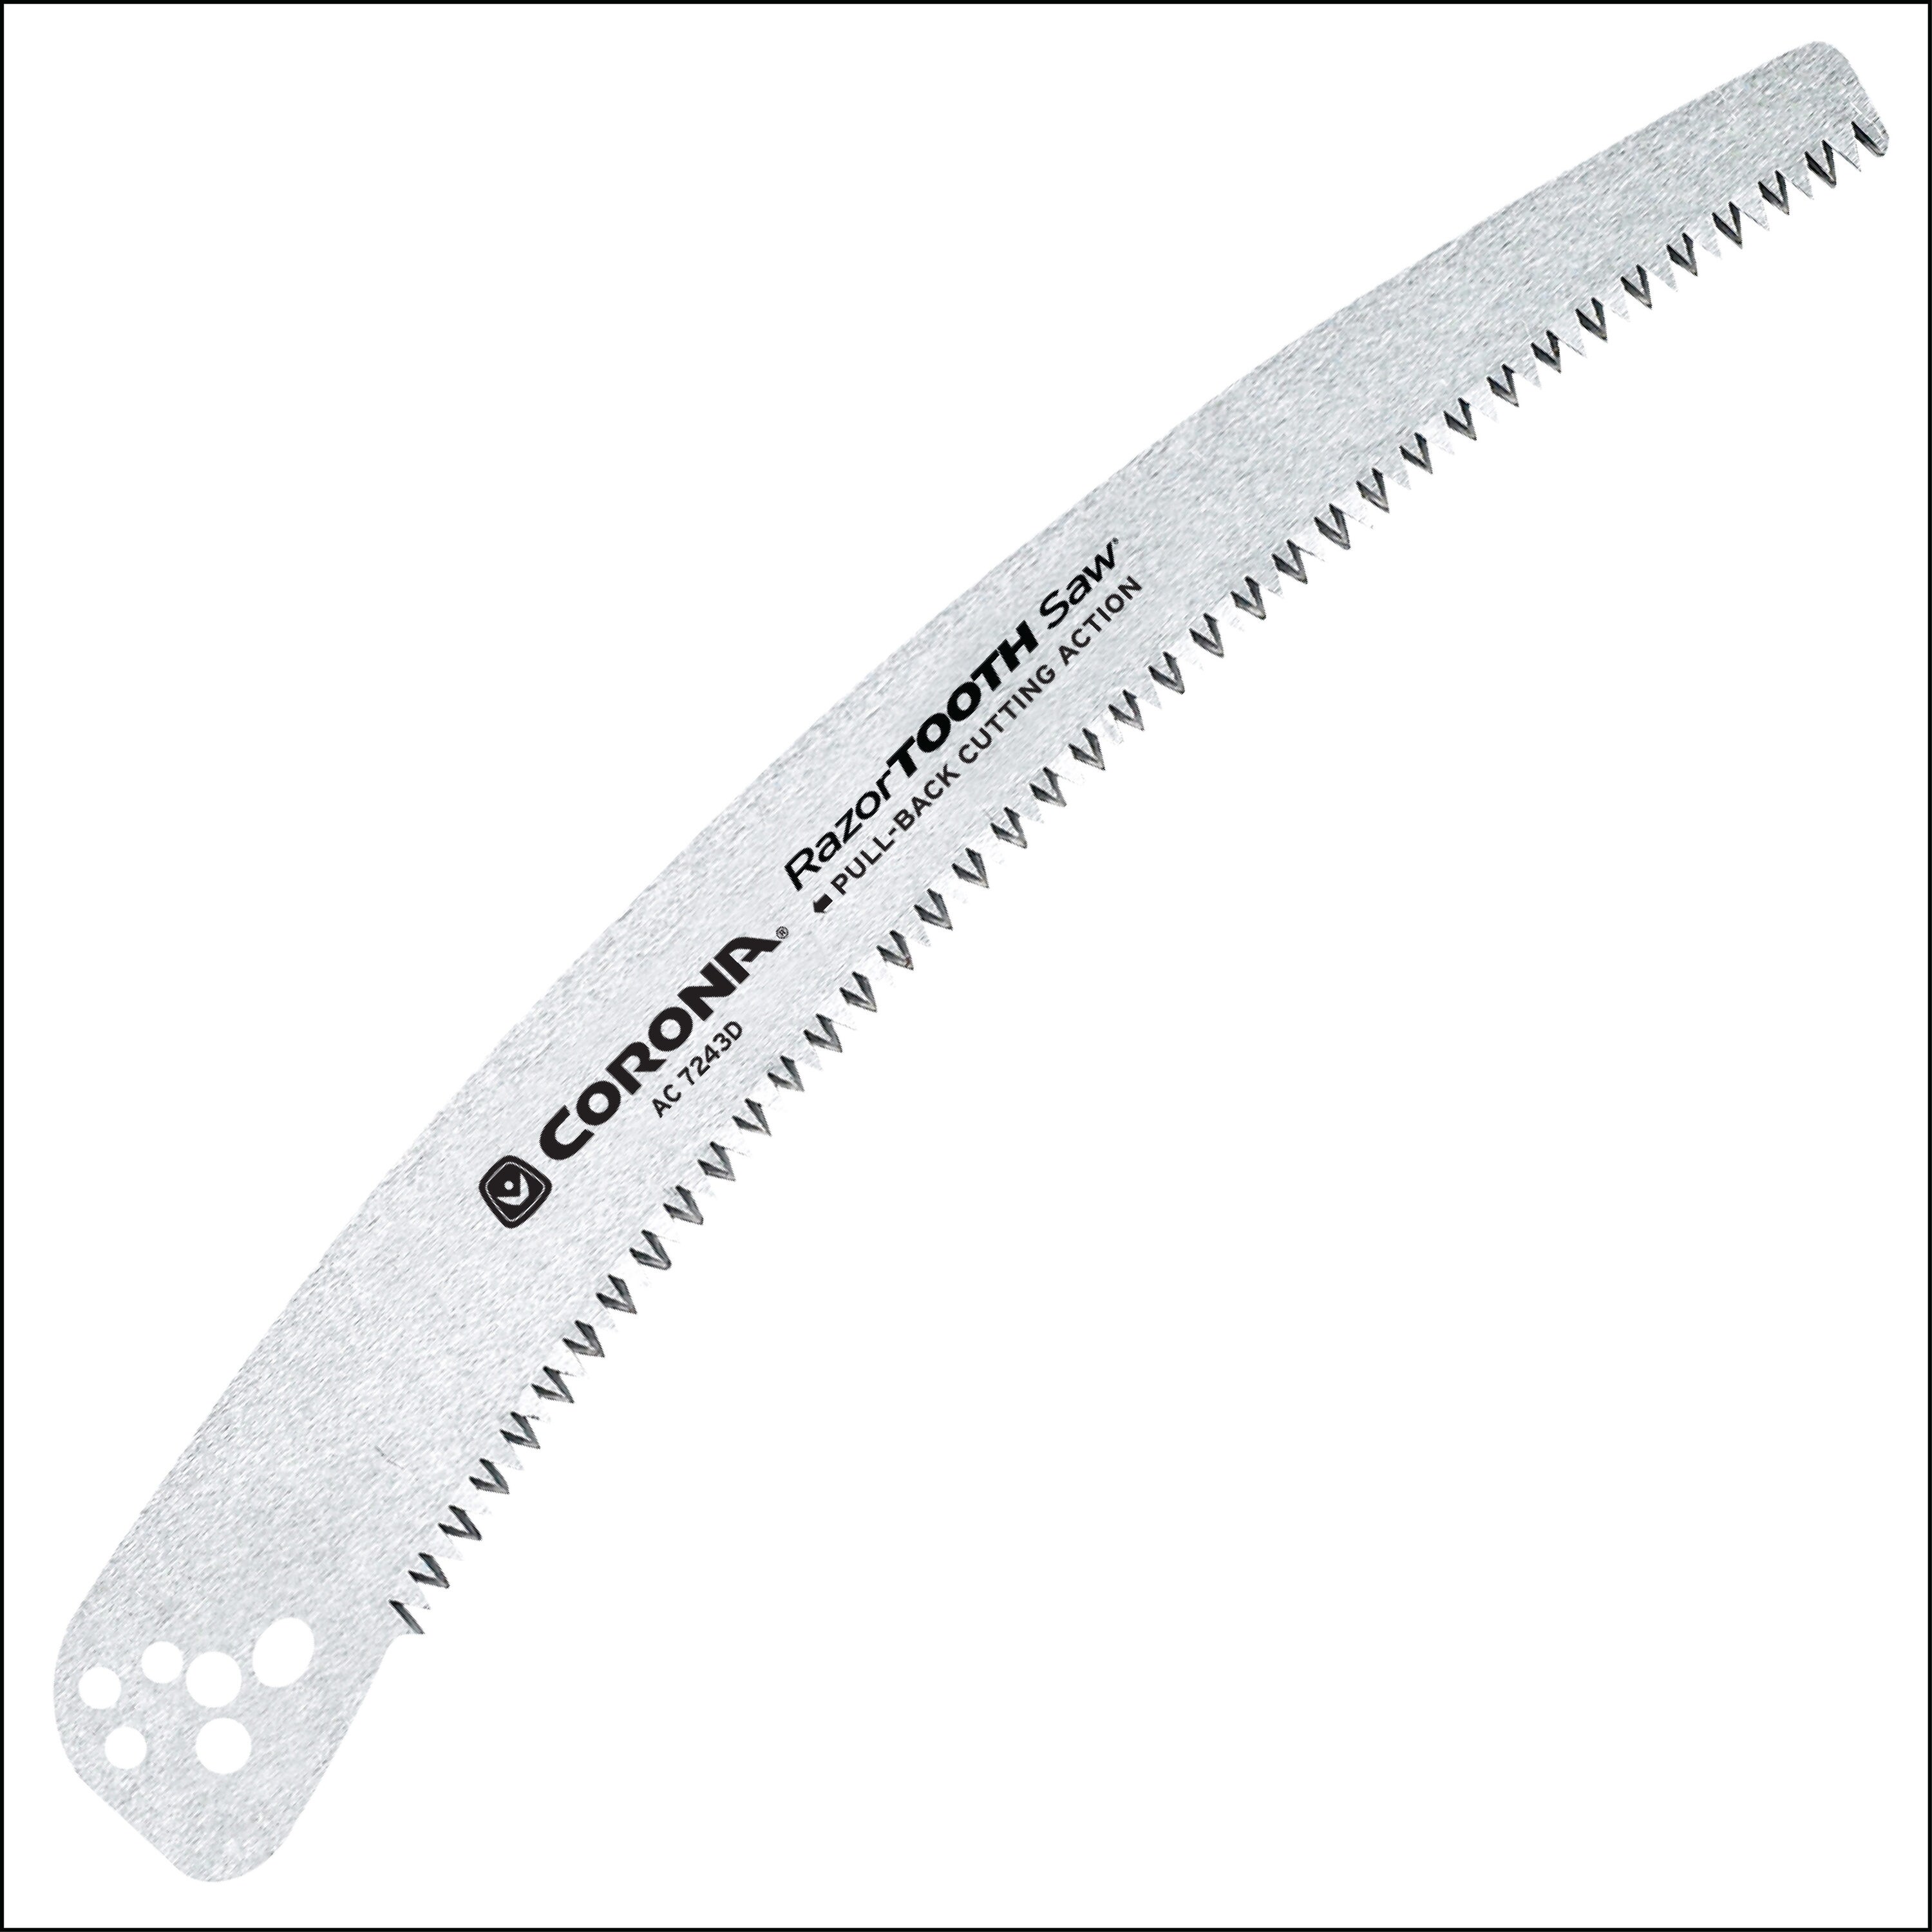 Corona Curved Tree Pruner Saw Blade Ac7243 for sale online 